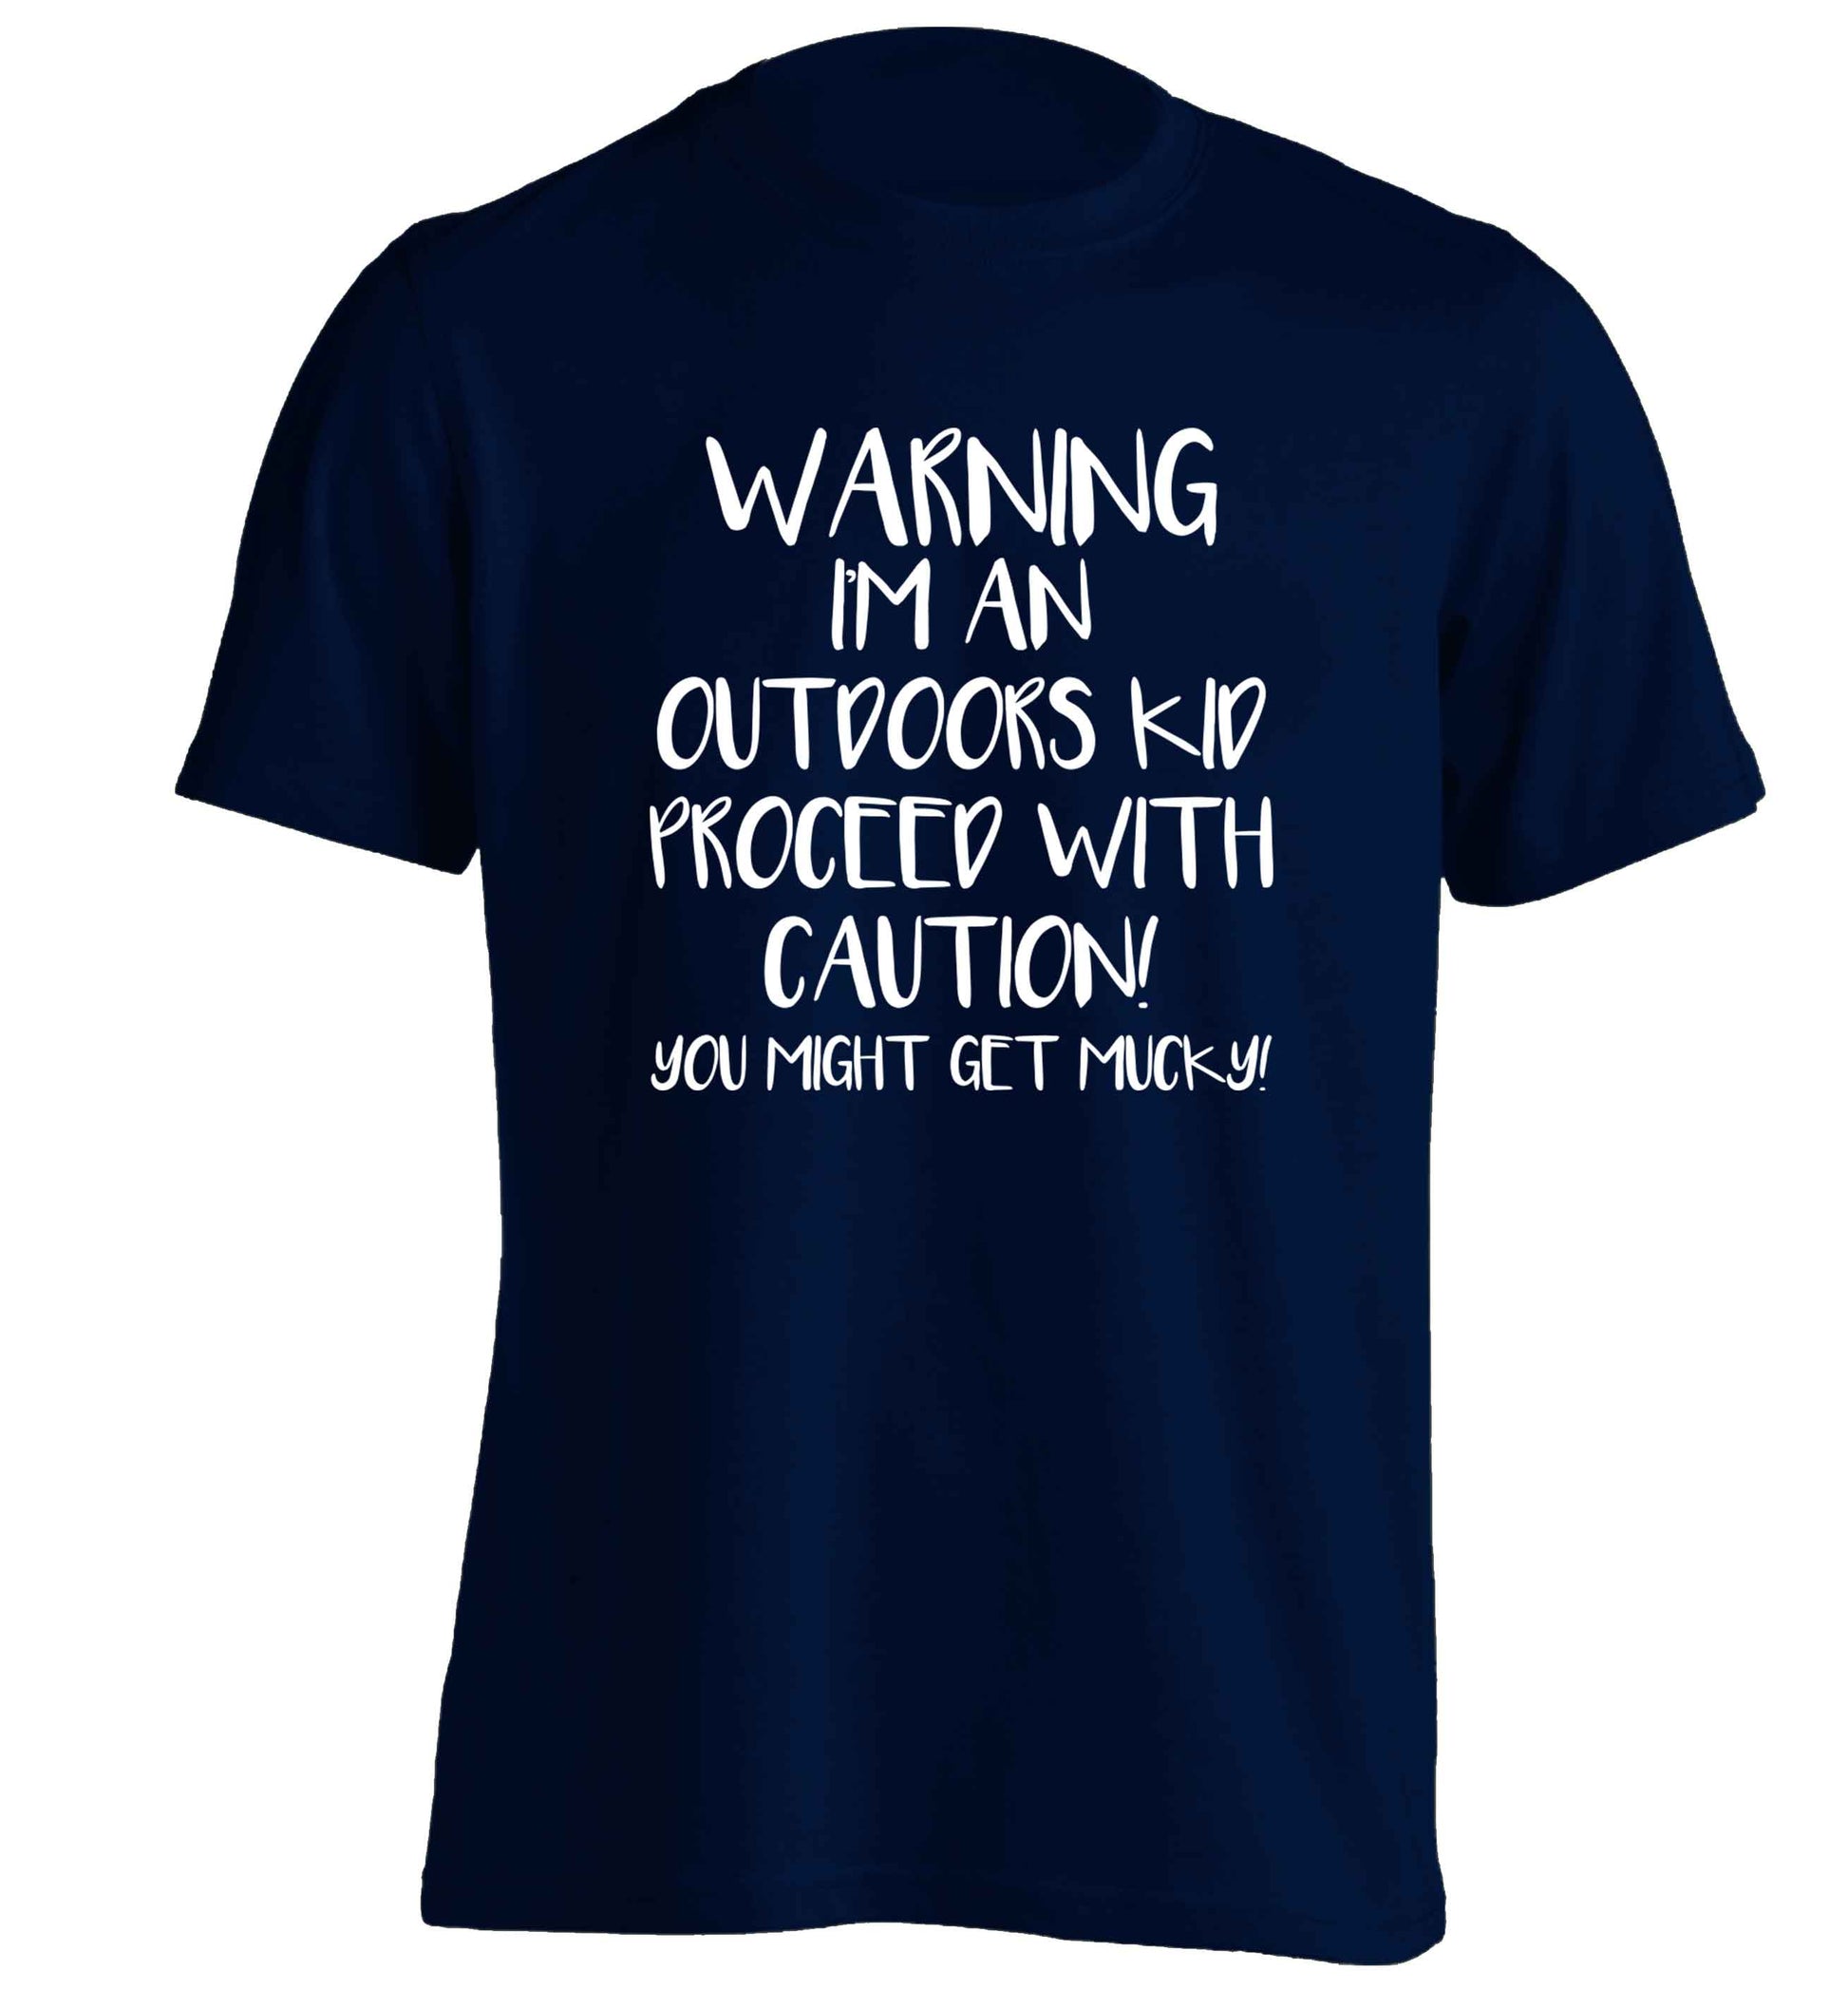 Warning I'm an outdoors kid! Proceed with caution you might get mucky adults unisex navy Tshirt 2XL